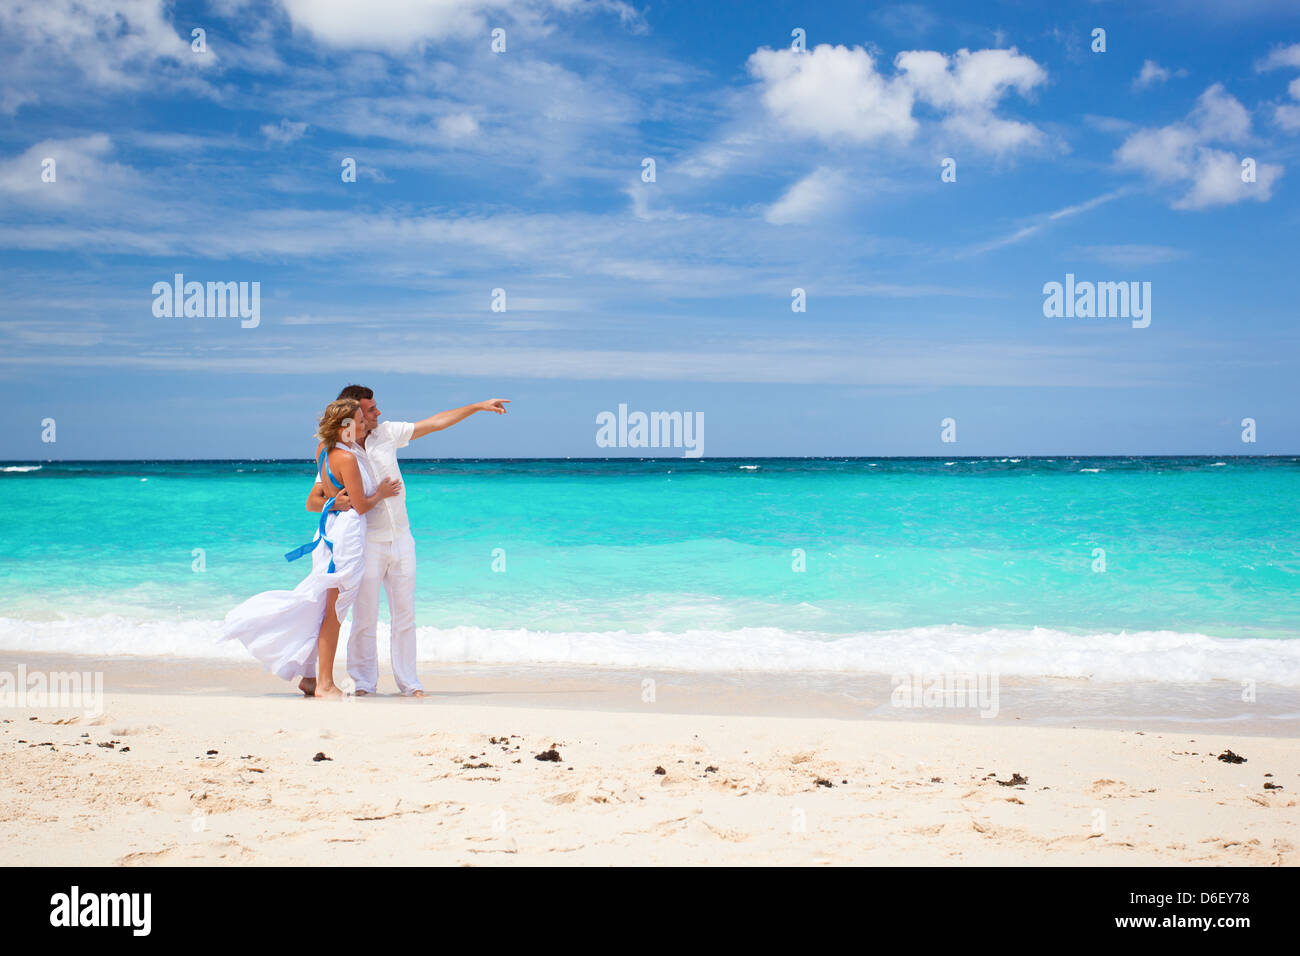 Bride and groom on tropical beach, walking Stock Photo